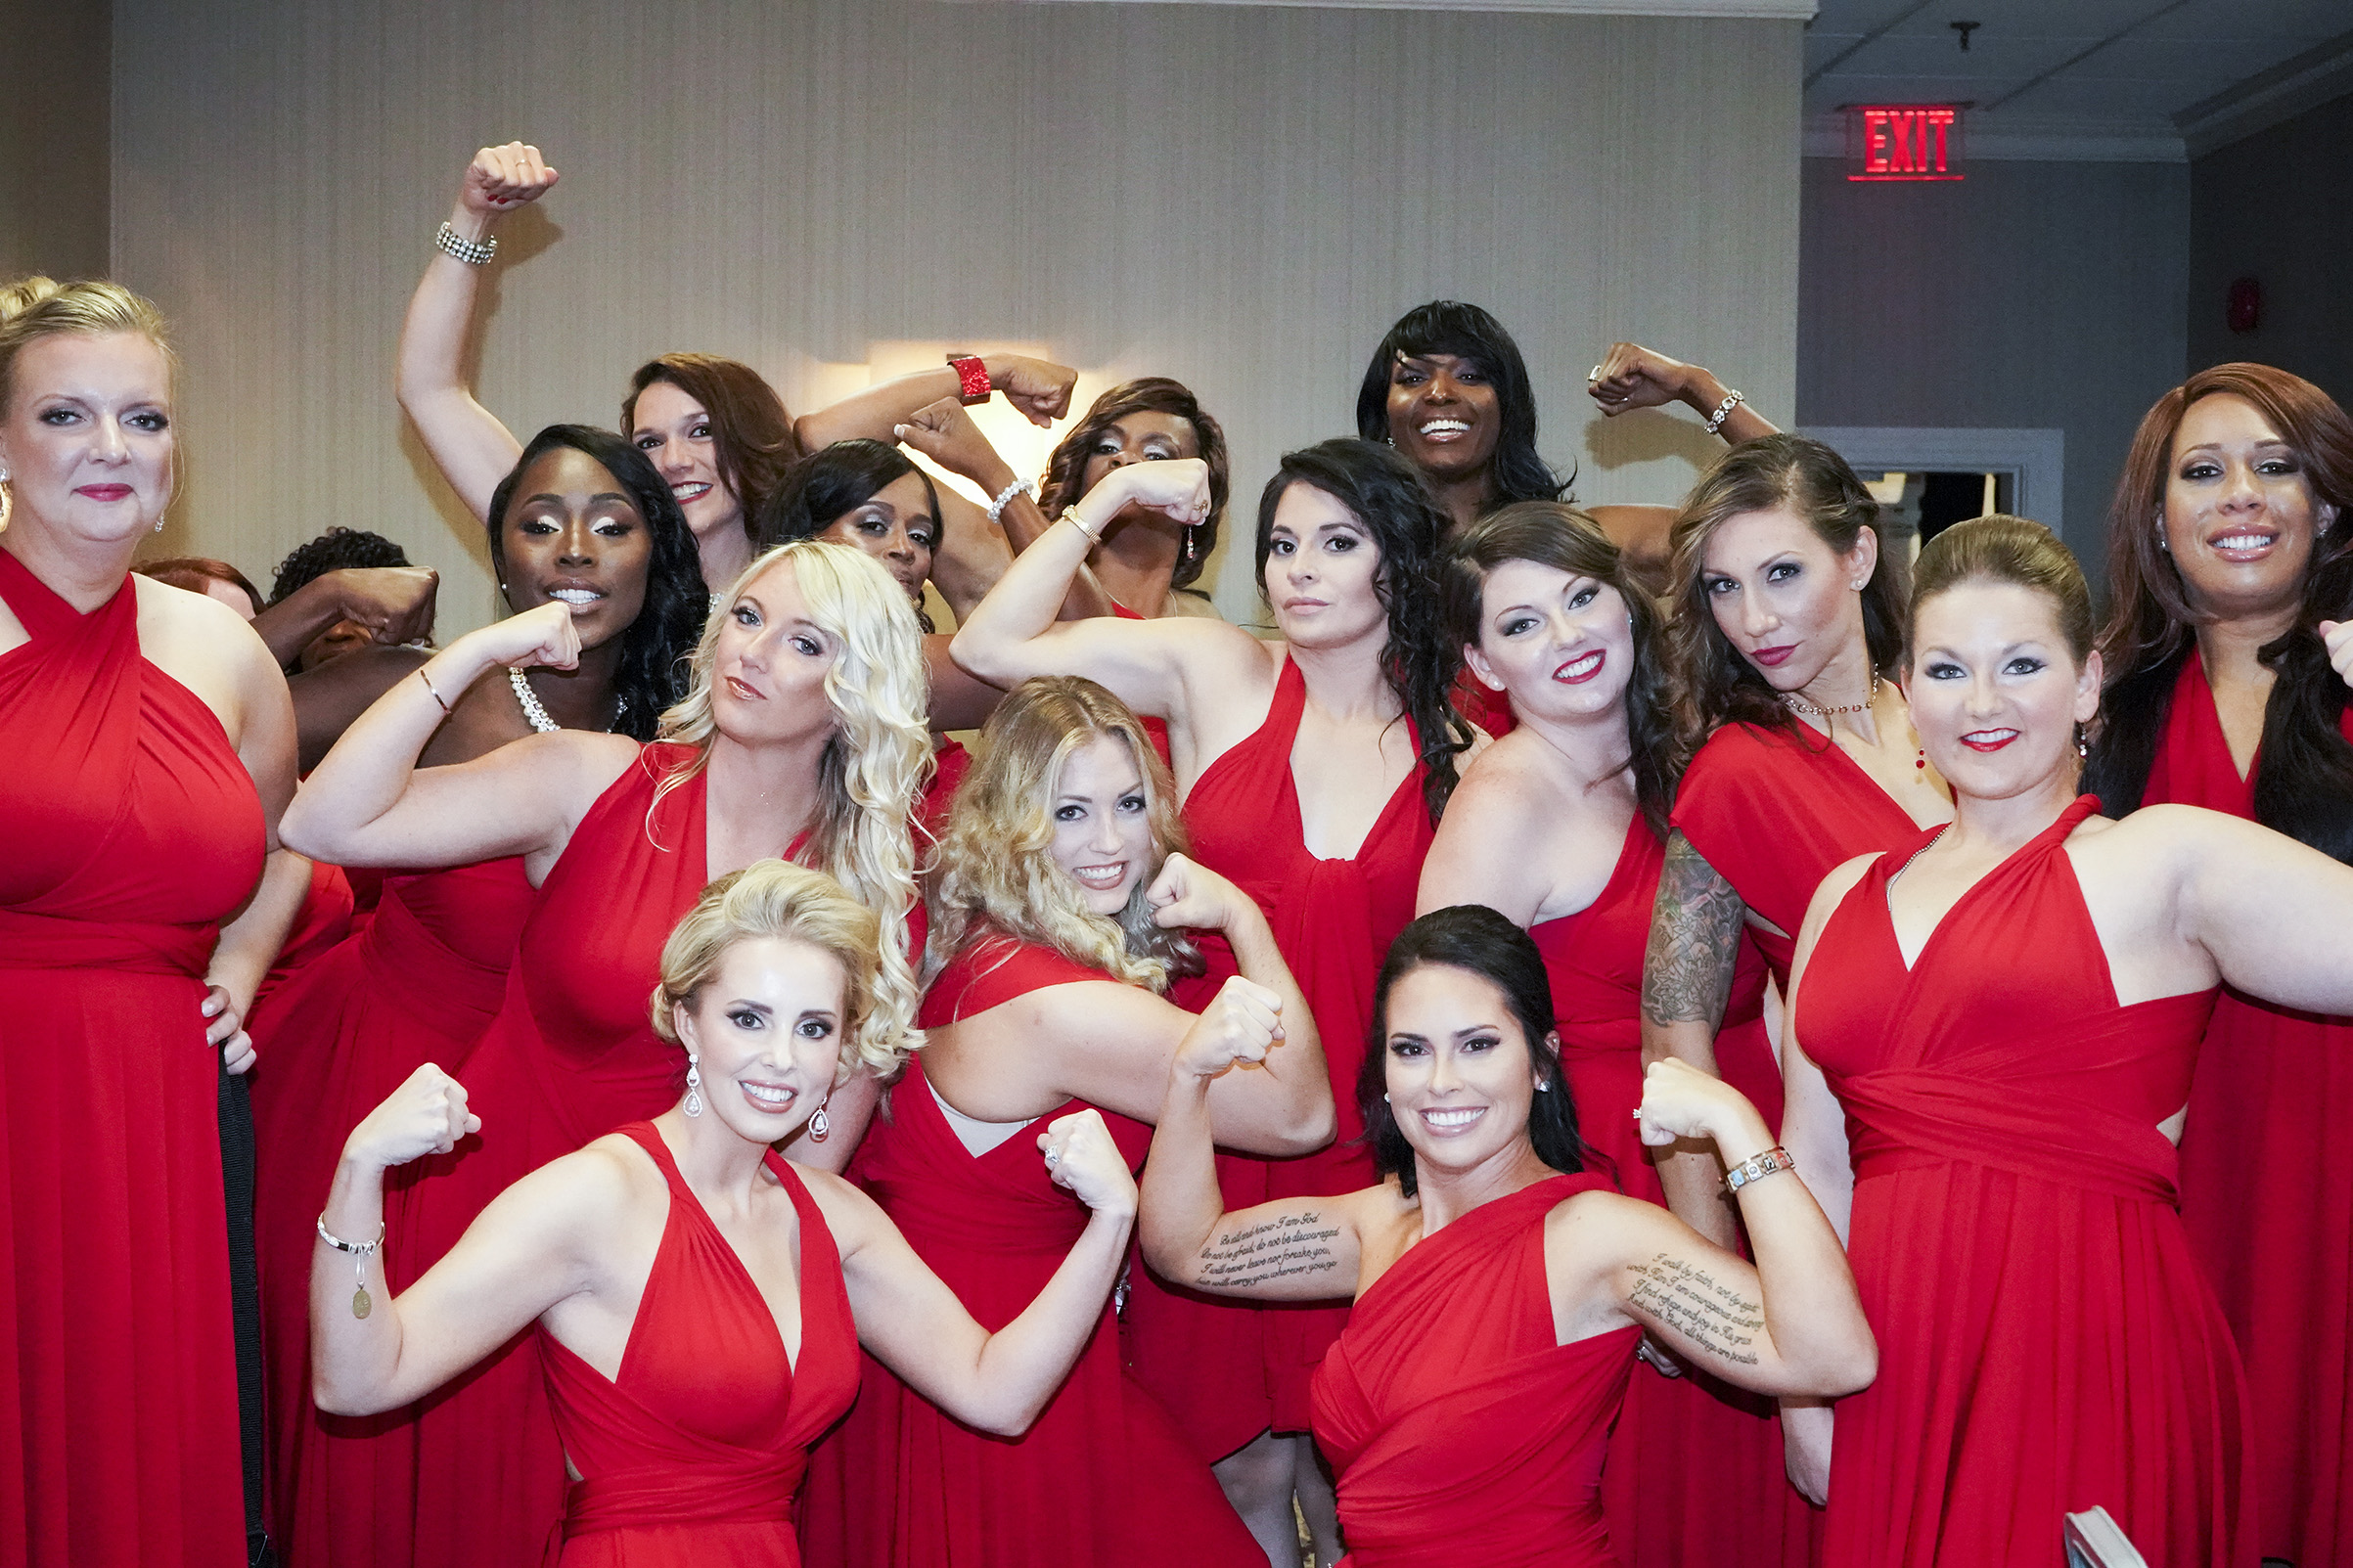 2017. Washington DC.  USA. Contestants flex before the 2017 Ms. Veteran America pageant in Washington DC.  Ms. Veteran America is a pageant for active duty and retired female members of the armed forces.  Part beauty pageant, part talent competition, part test of strength and commitment, the event raises funds for Final Salute, an organization providing housing and support for homeless women veterans and their children.  Some of the participants danced and some sang, but many gave testimonials of sexual assault, PTSD and homelessness. Lindsay Gutierrez won the 2017 competition.  The keynote speaker was the original "Daisy Duke", Catherine Bach.